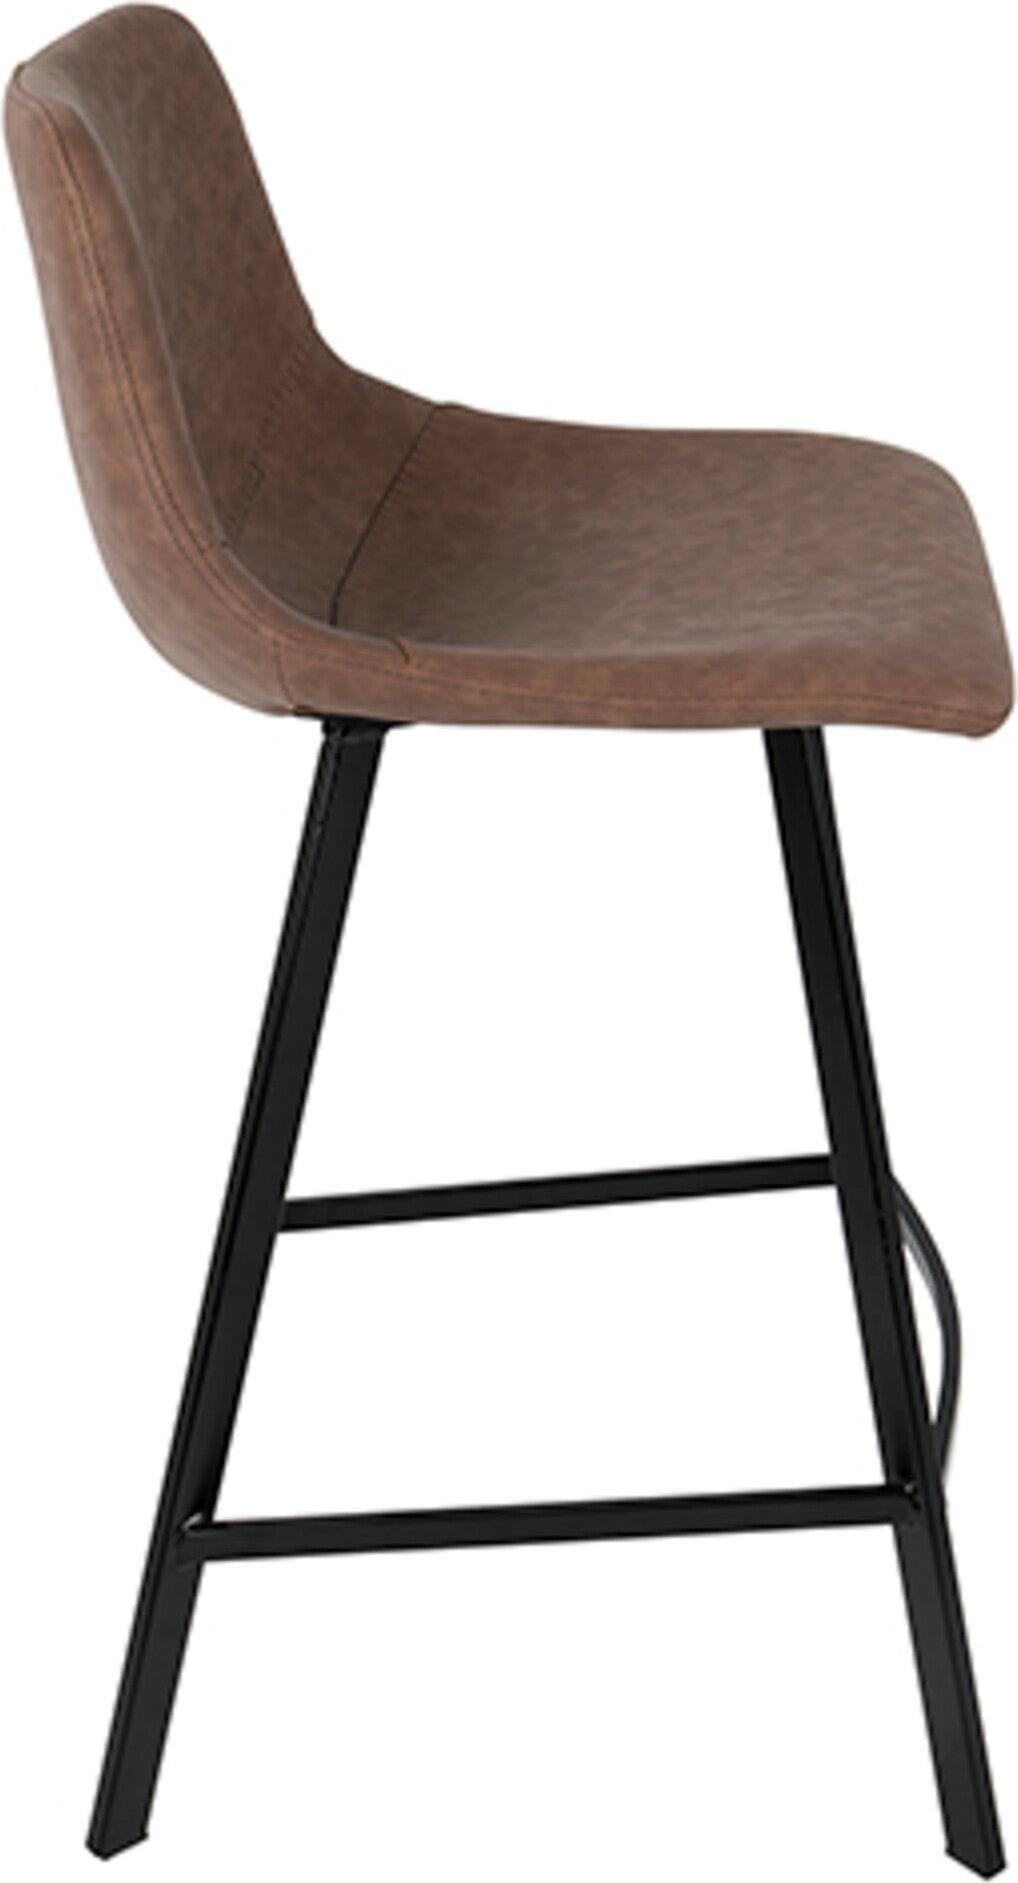 Lumisource Barstools - Outlaw Counter Stool Brown & Black Legs (Set of 2)